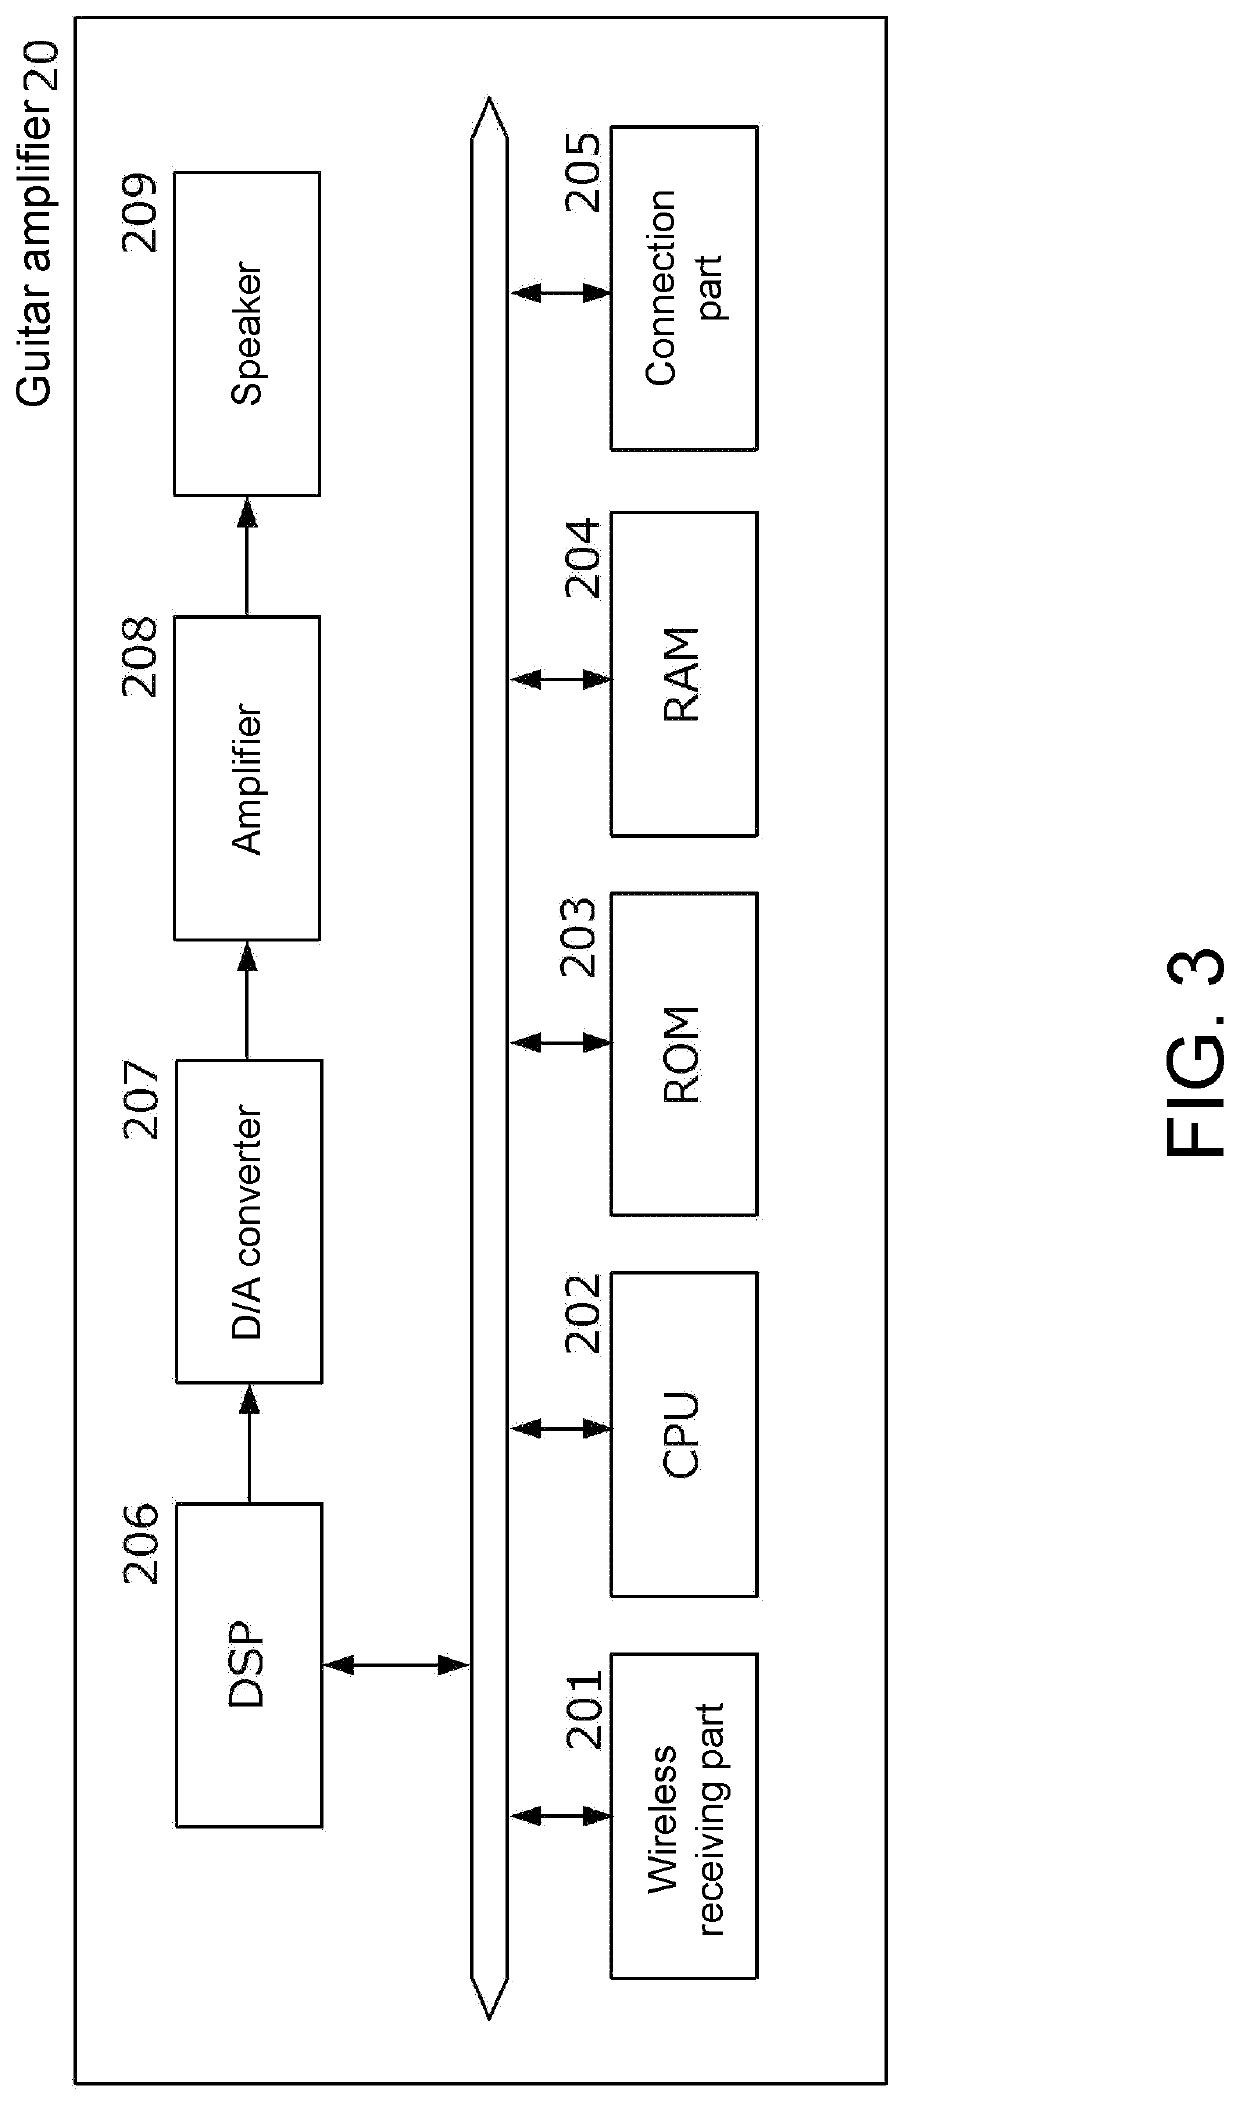 Electric musical instrument system, control method and non-transitory computer readable medium thereof